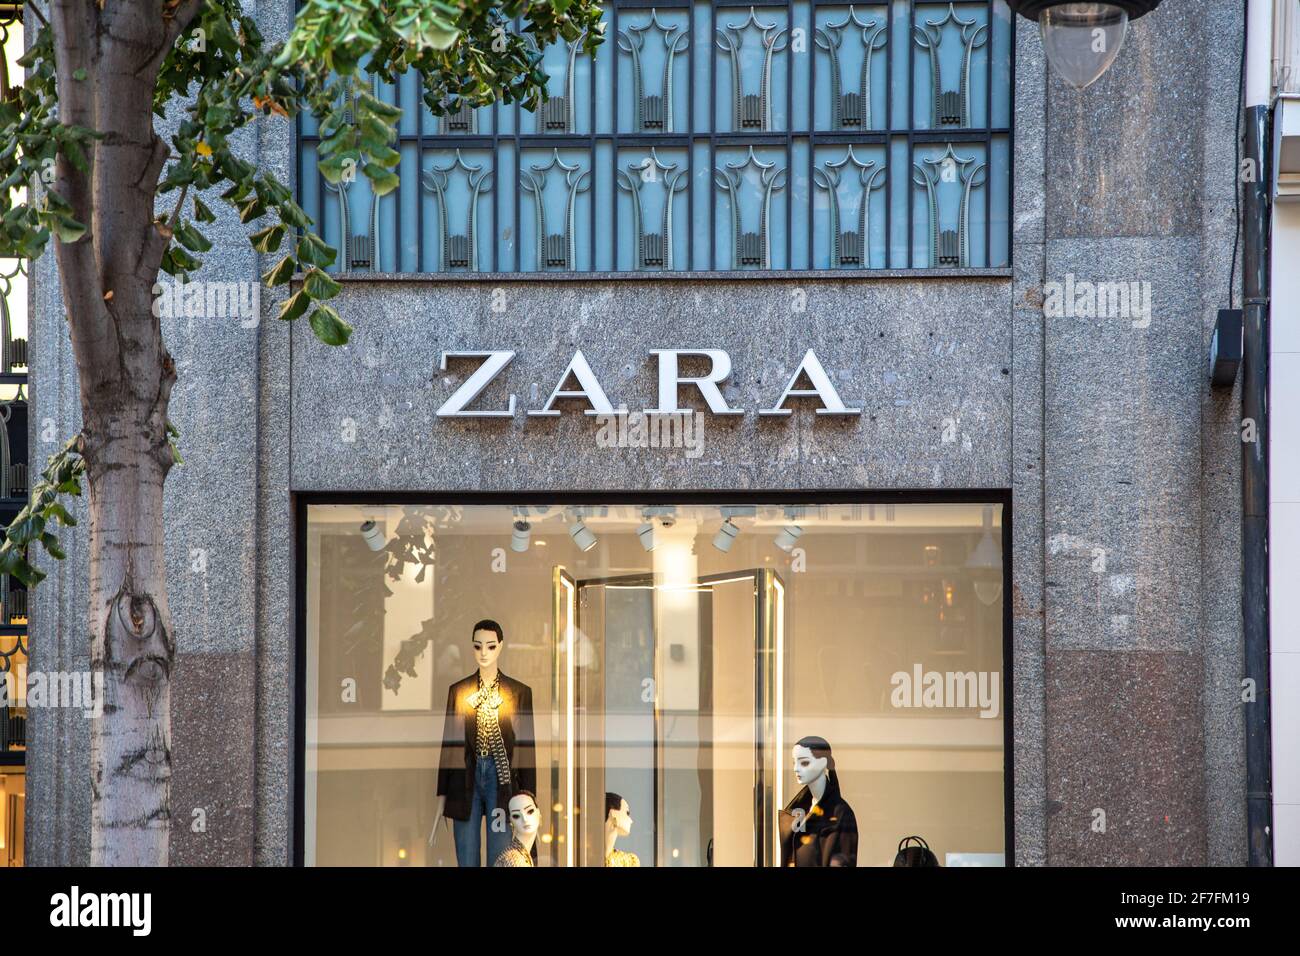 Zara Shop Front High Resolution Stock Photography and Images - Alamy